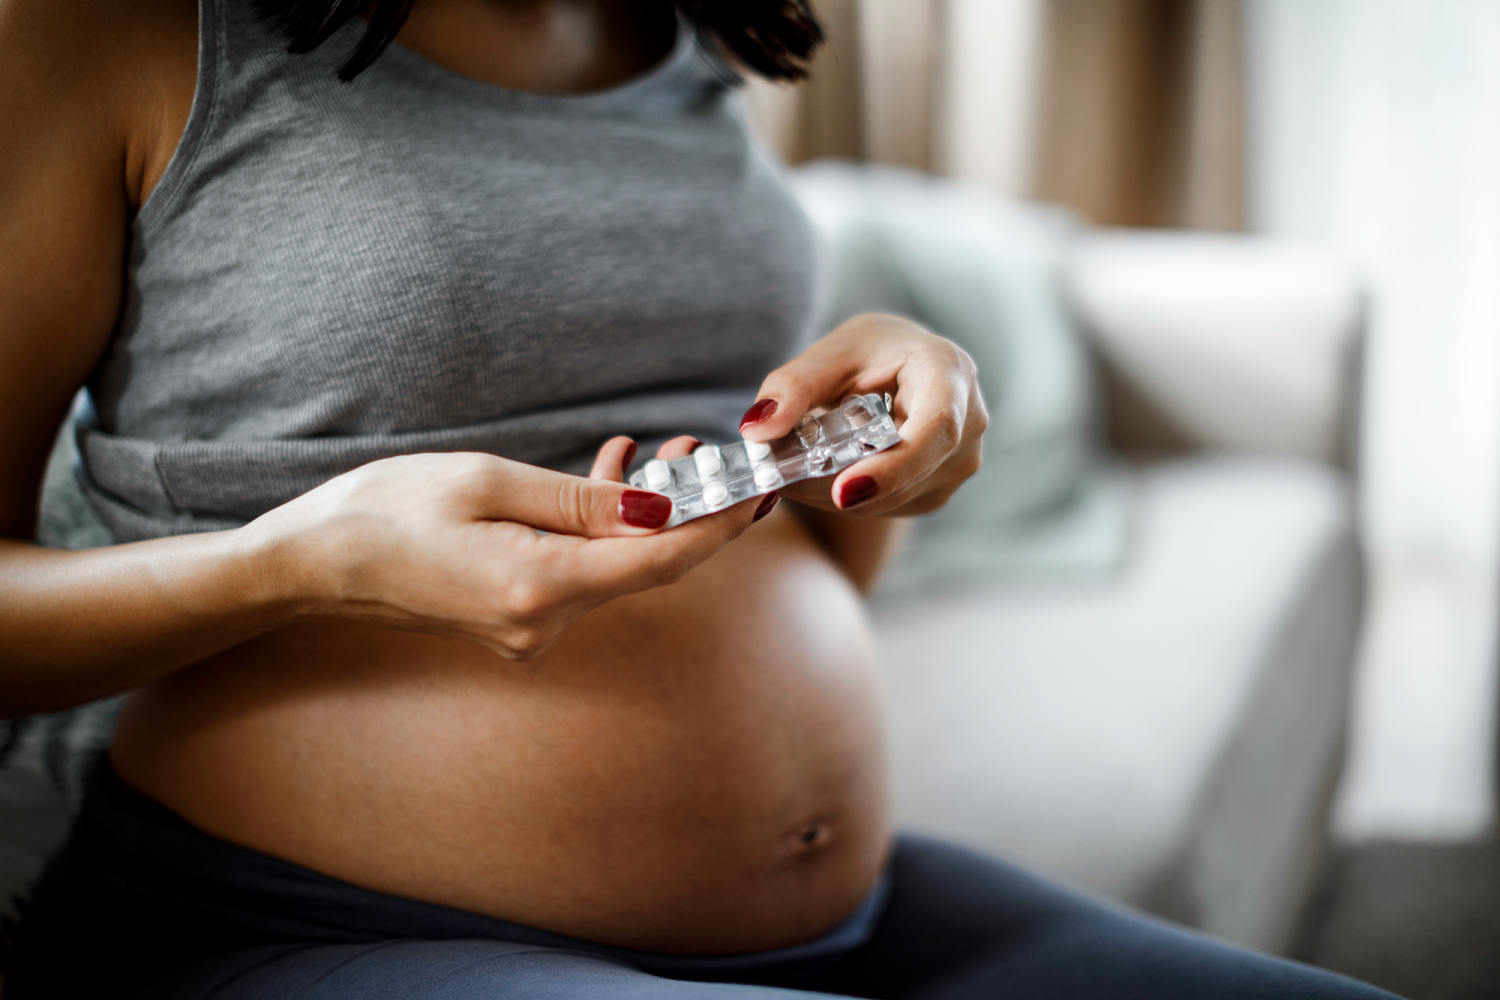 Acetaminophen during pregnancy not associated with ADHD or autism risk